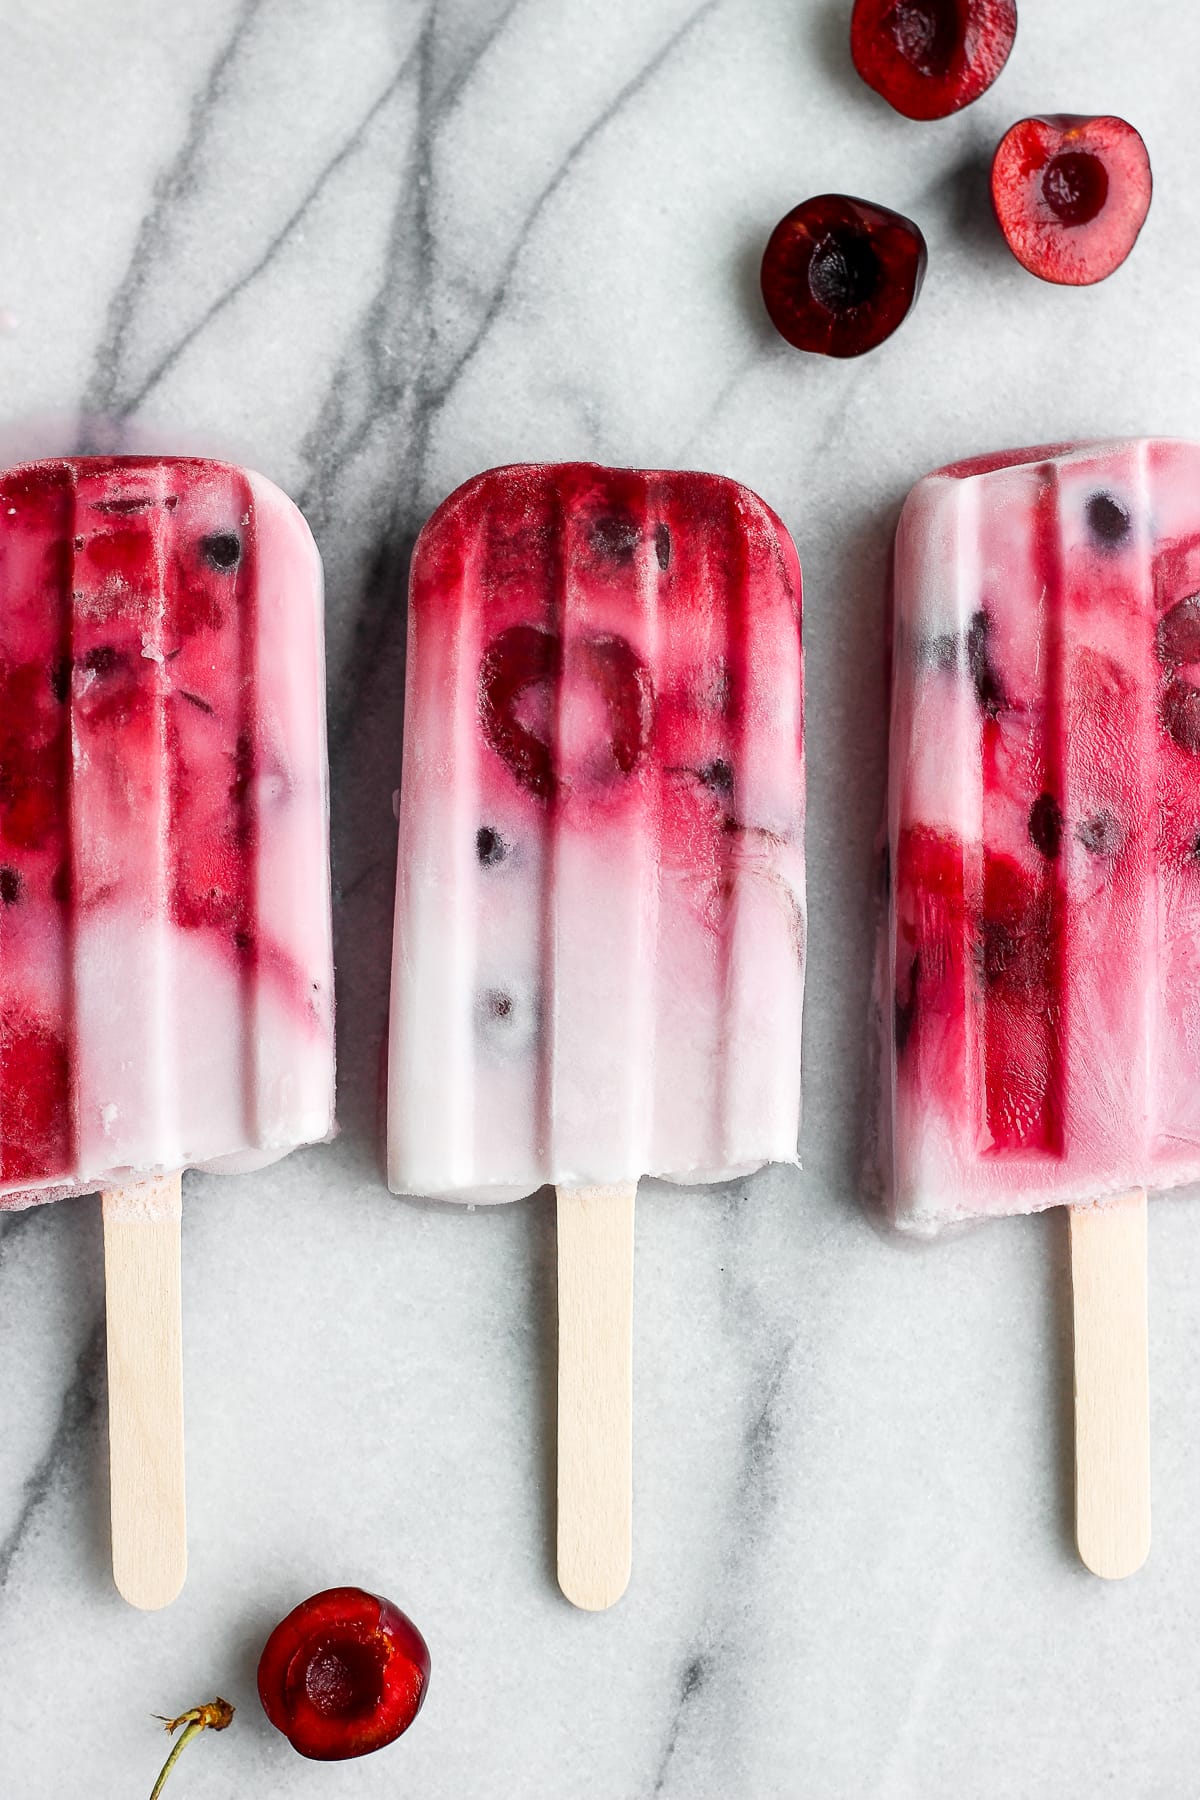 Three strawberry cherry and cream popsicles on the counter.